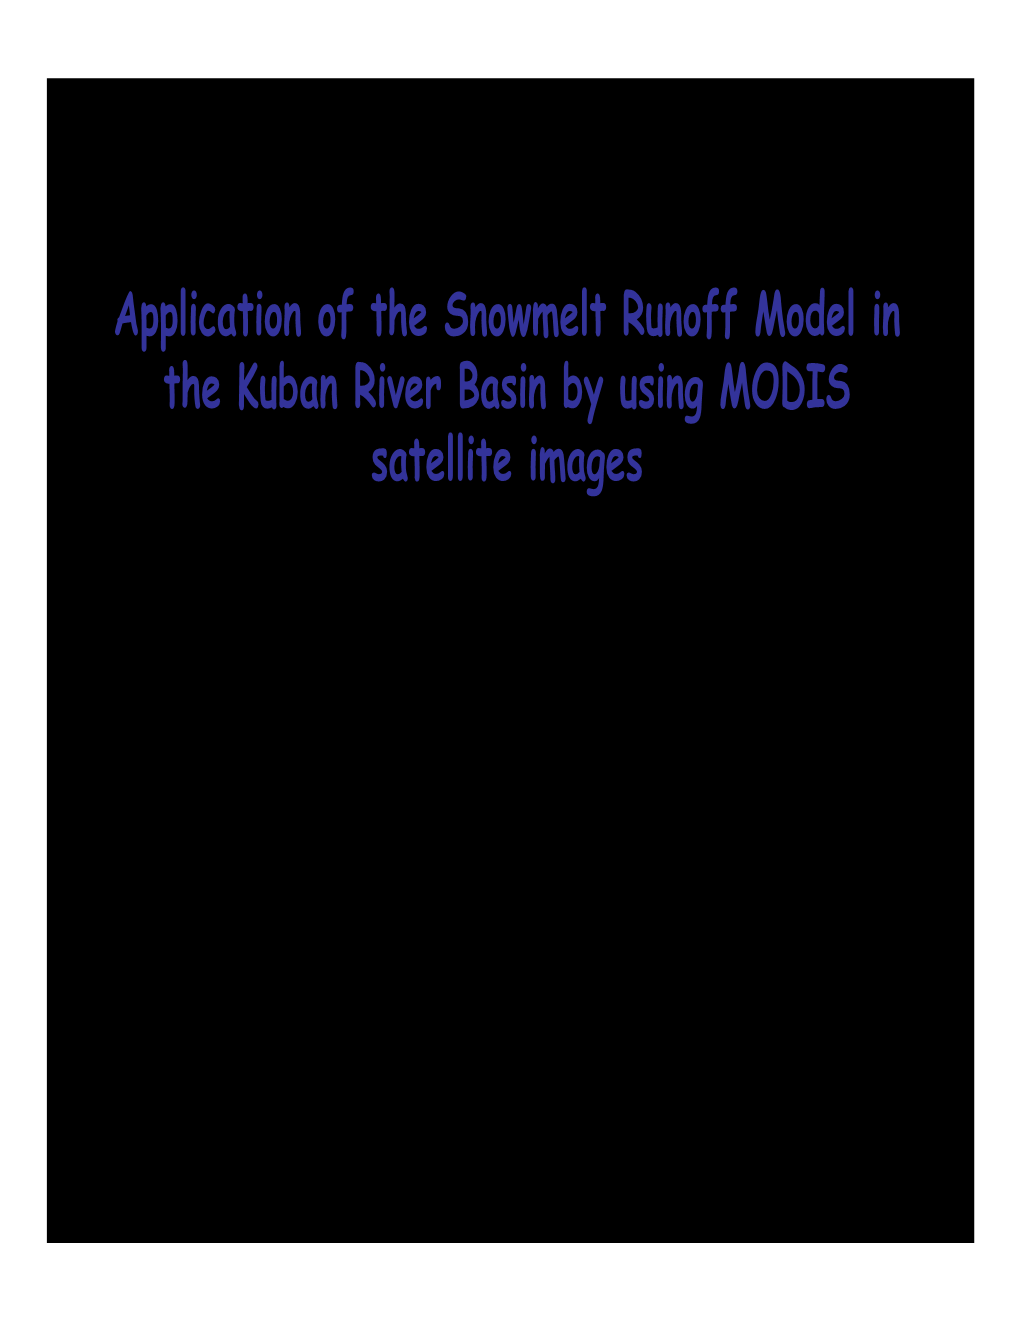 Application of the Snowmelt Runoff Model in the Kuban River Basin by Using MODIS Satellite Images